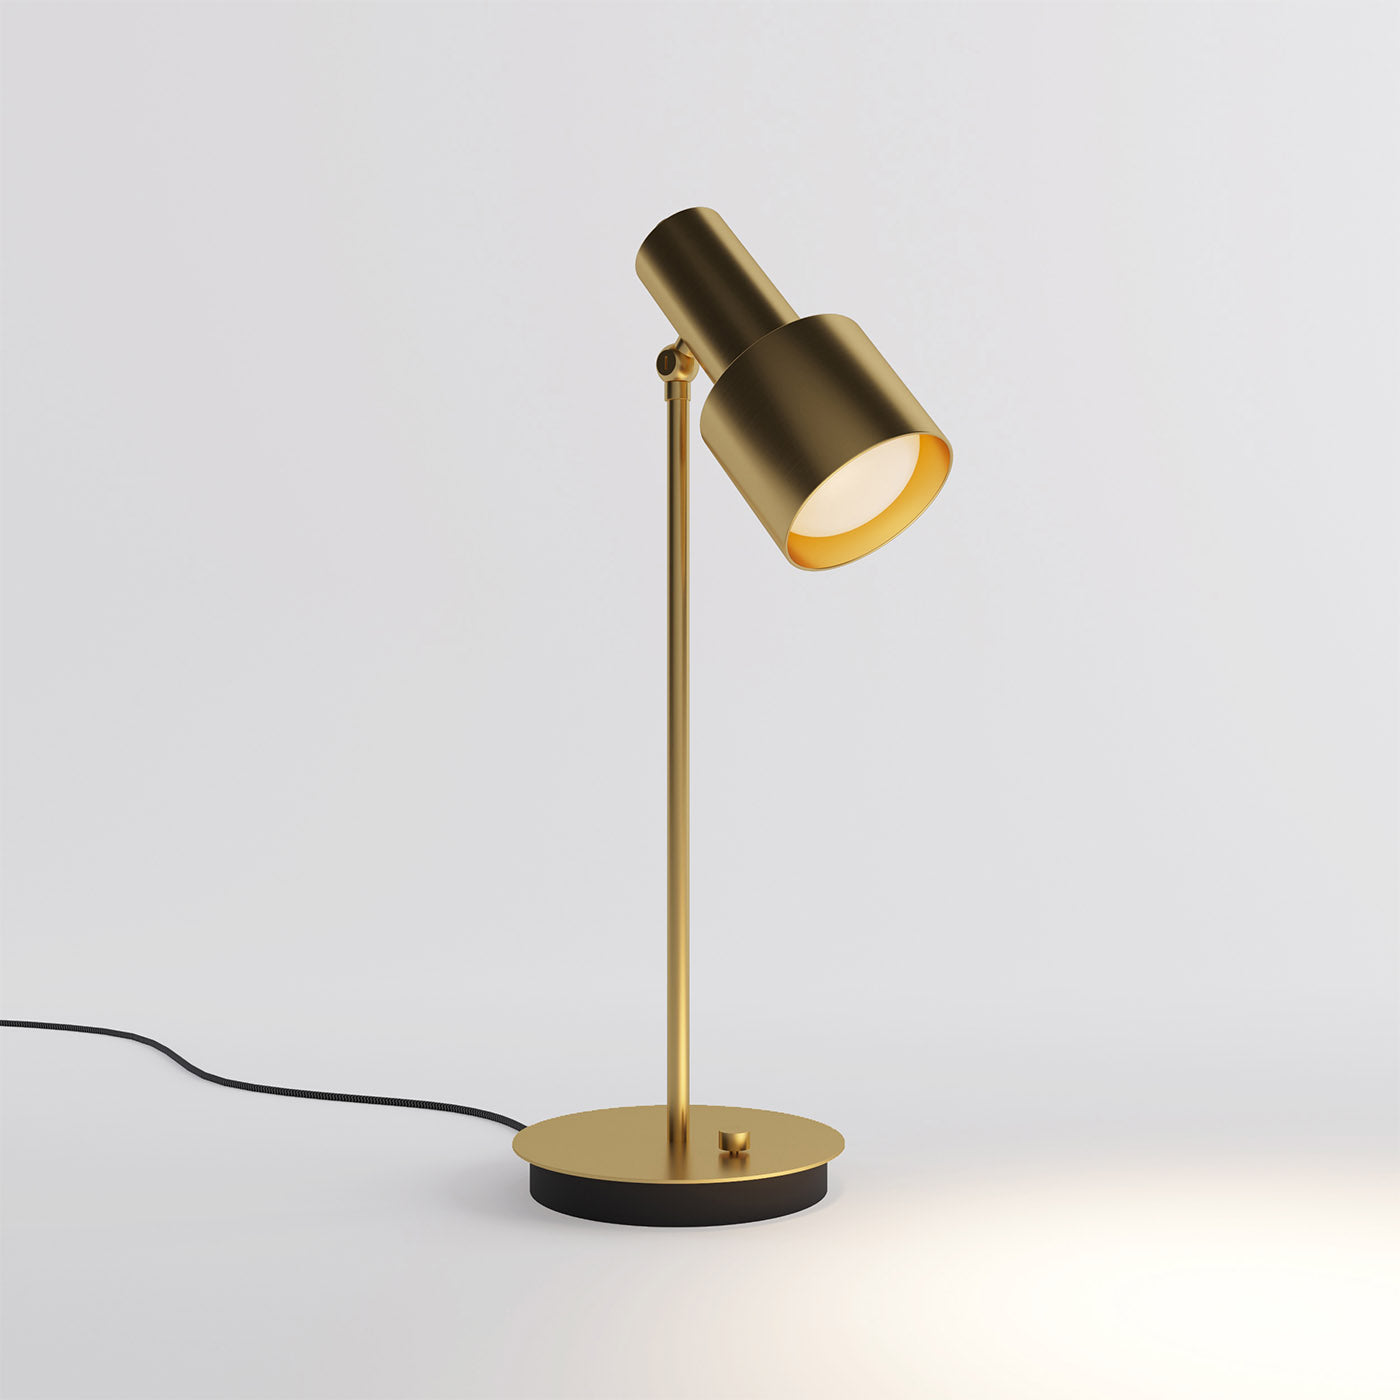 Light Gallery Luxury GP Bronzed Table Lamp by Marco Police - Alternative view 2